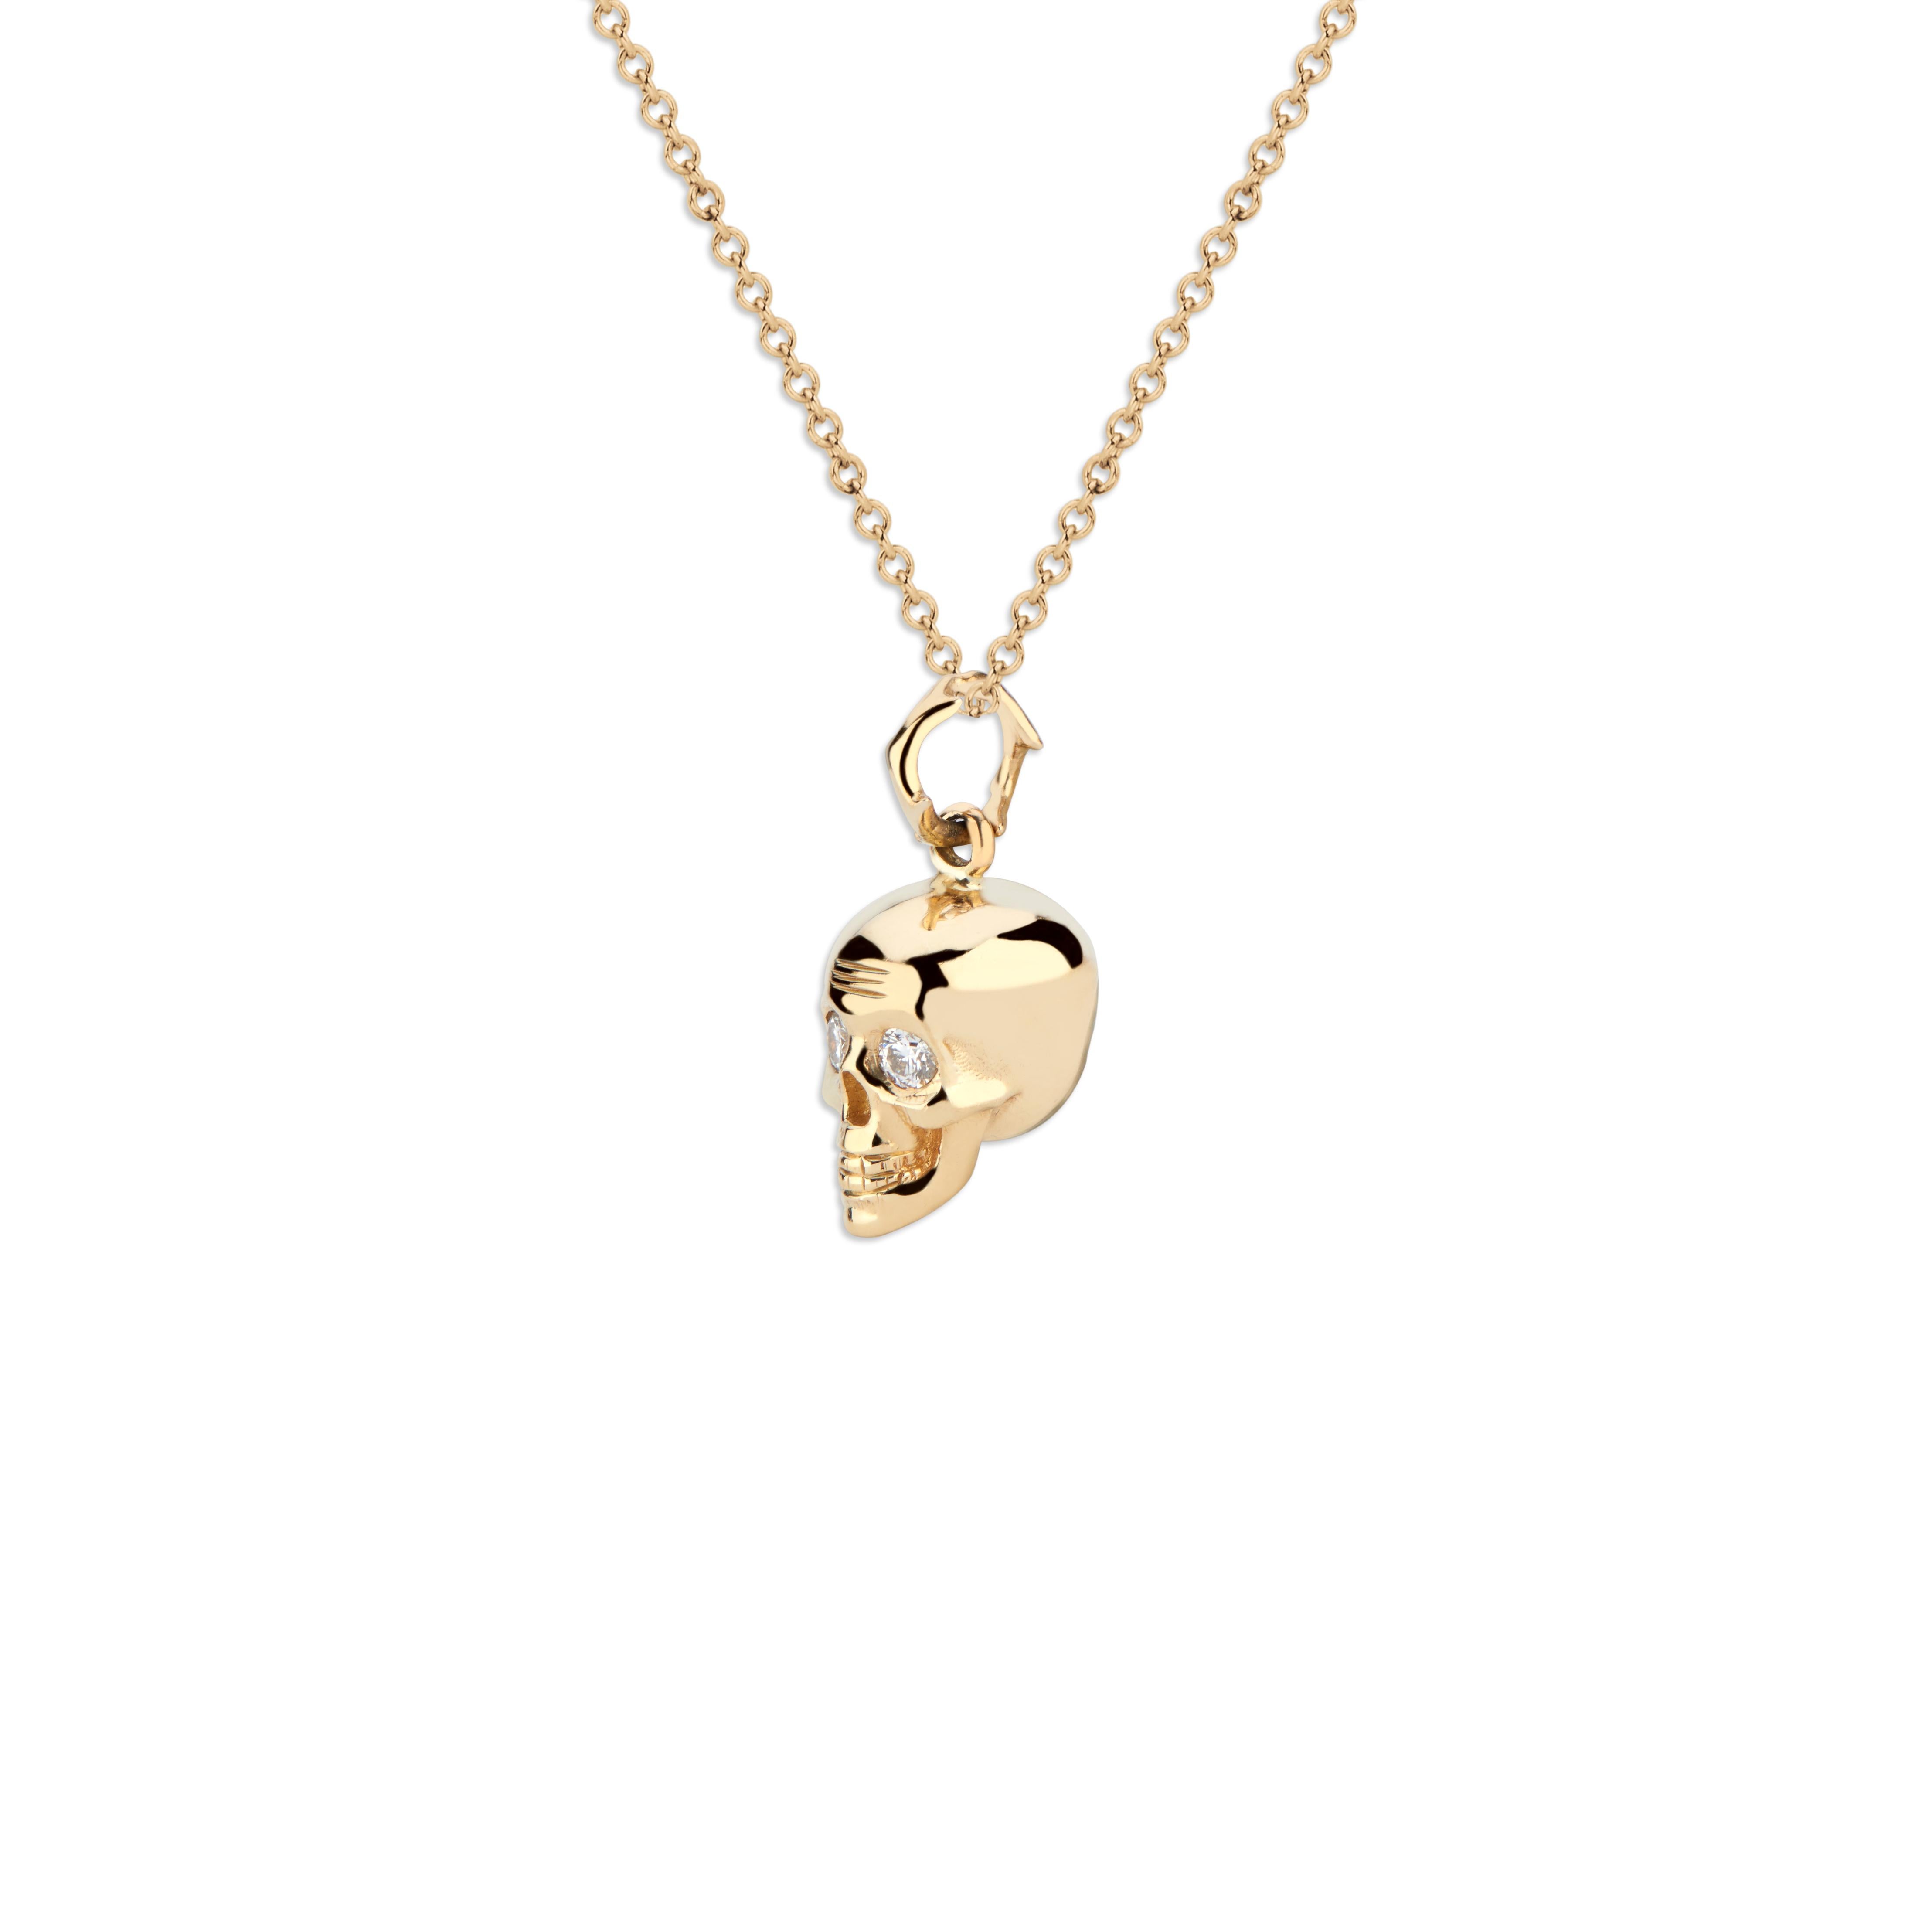 You can't go wrong with a skull, especially this one.  This 14k gold pendant is a hefty piece that is meant to make a statement.  It hangs on a Crown of Thorns jump ring, and the white diamond eyes command attention. Although the piece is fierce, it